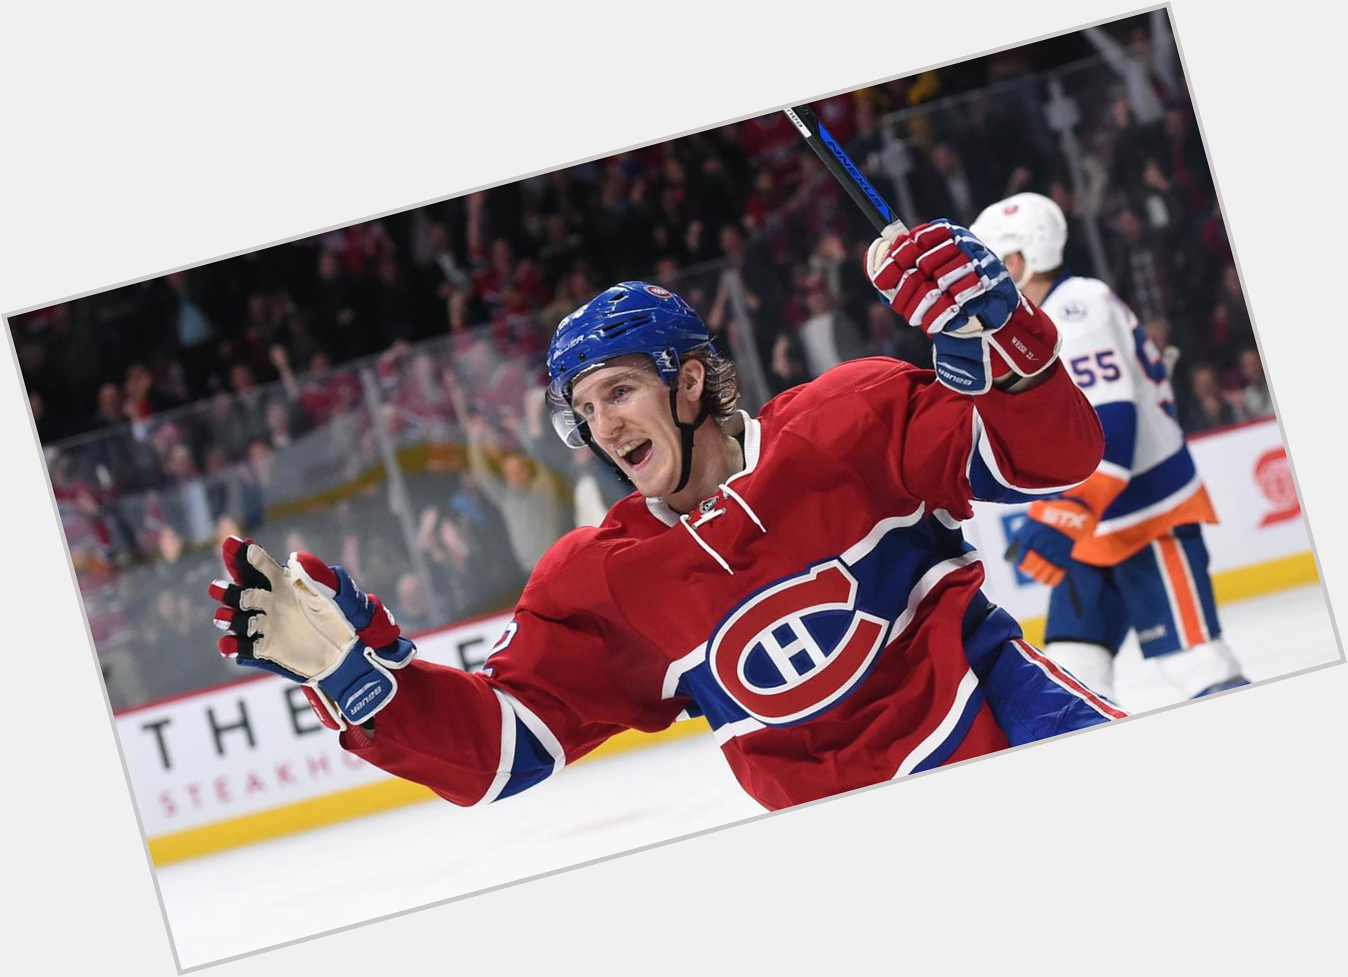 Happy birthday to Dale Weise 